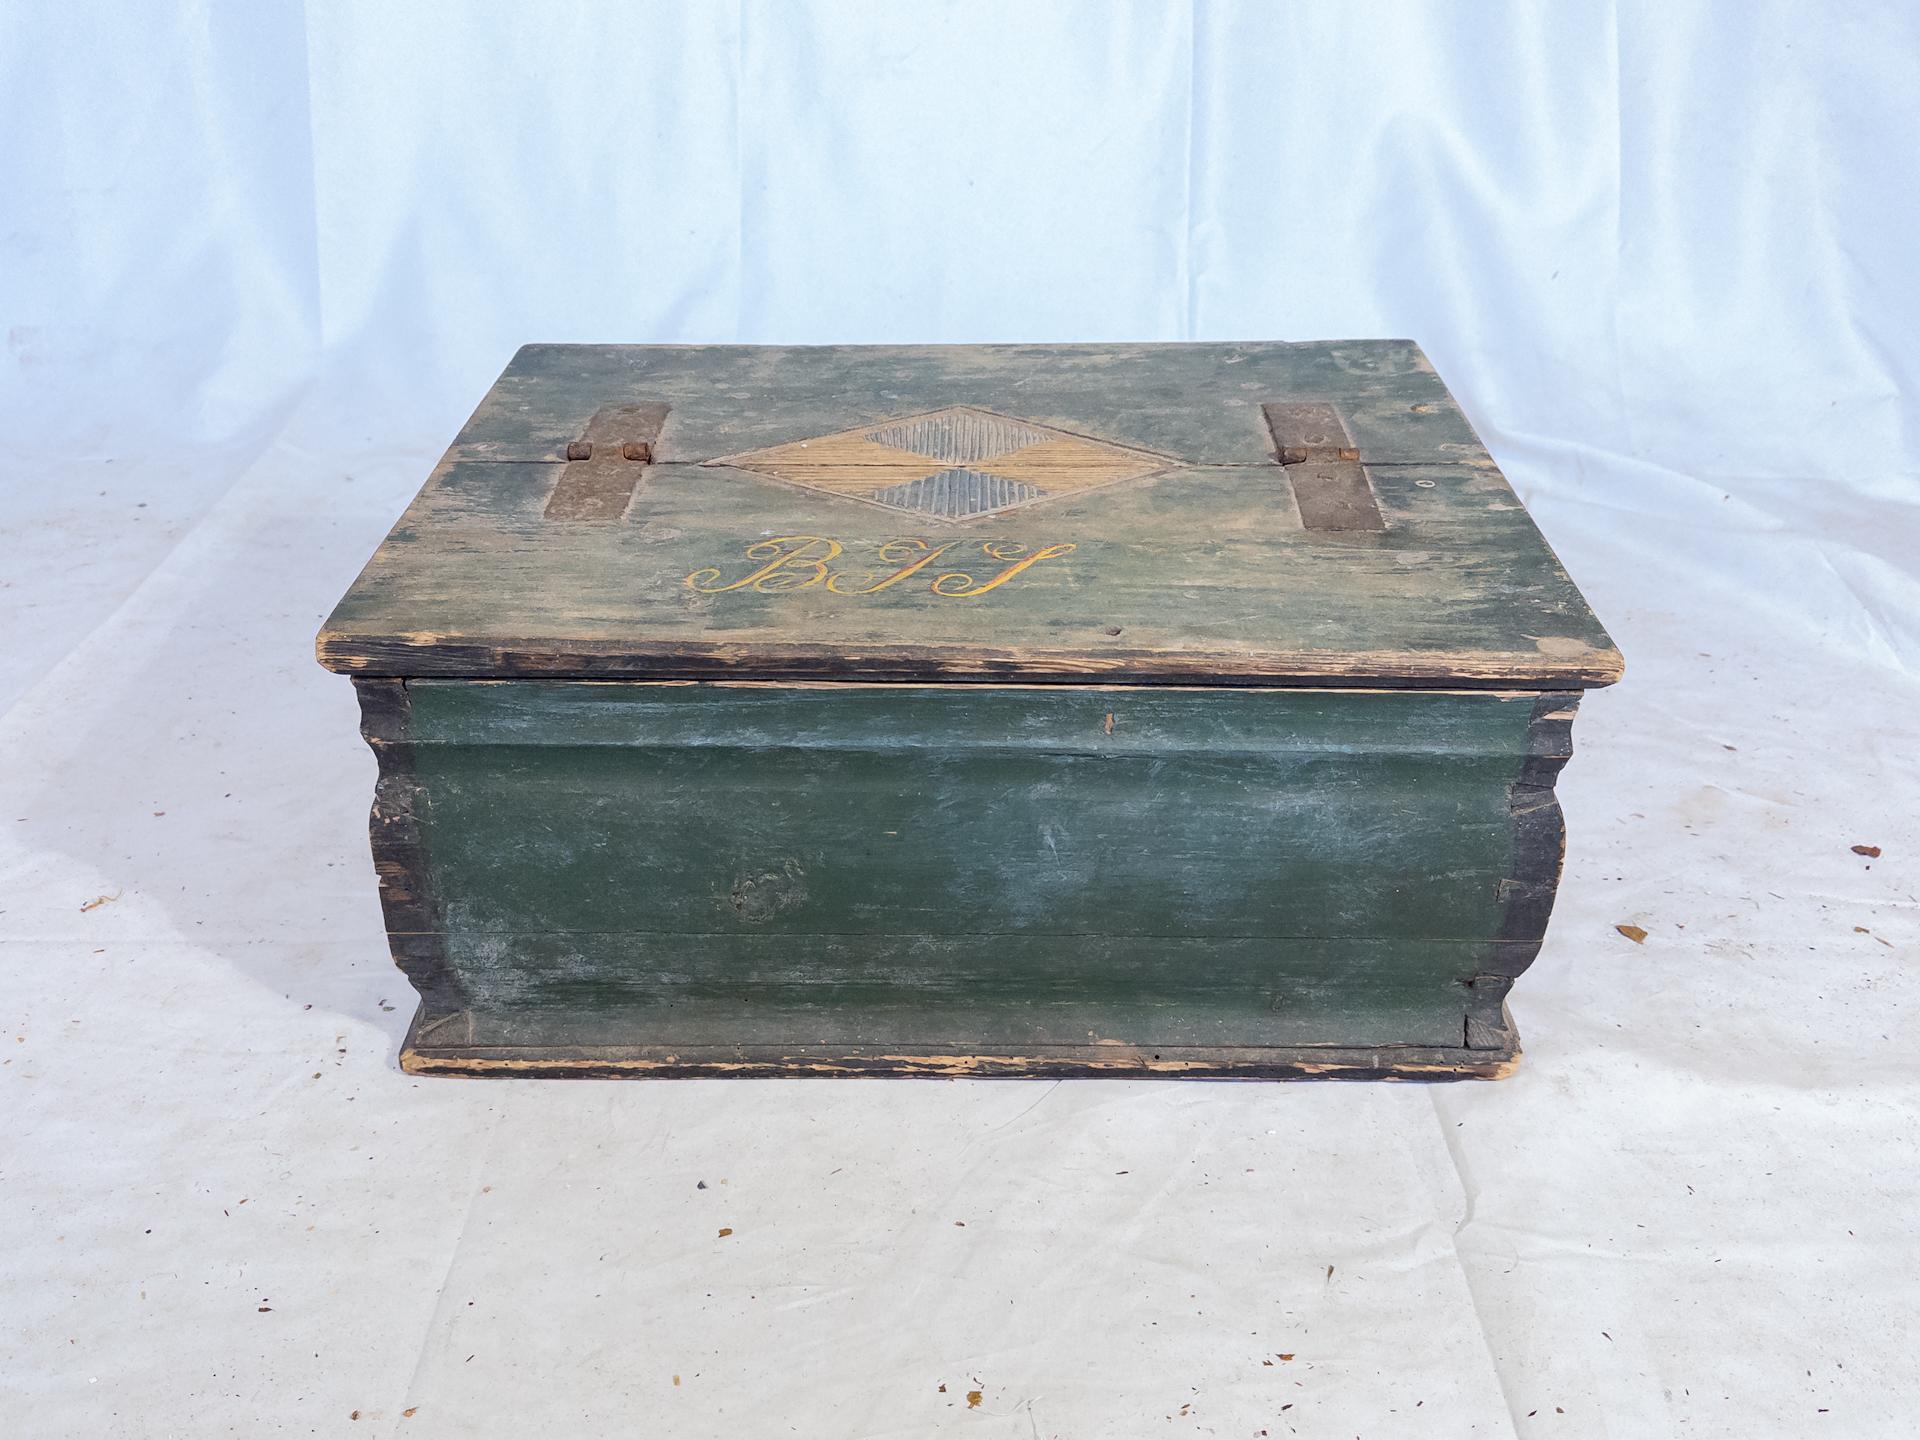 The 19th Century Small Swedish Chest is not just a charming piece of furniture; it's a testament to the timeless allure of traditional craftsmanship. Its quaint design and distinctive green paint tell a story of craftsmanship and character. Crafted